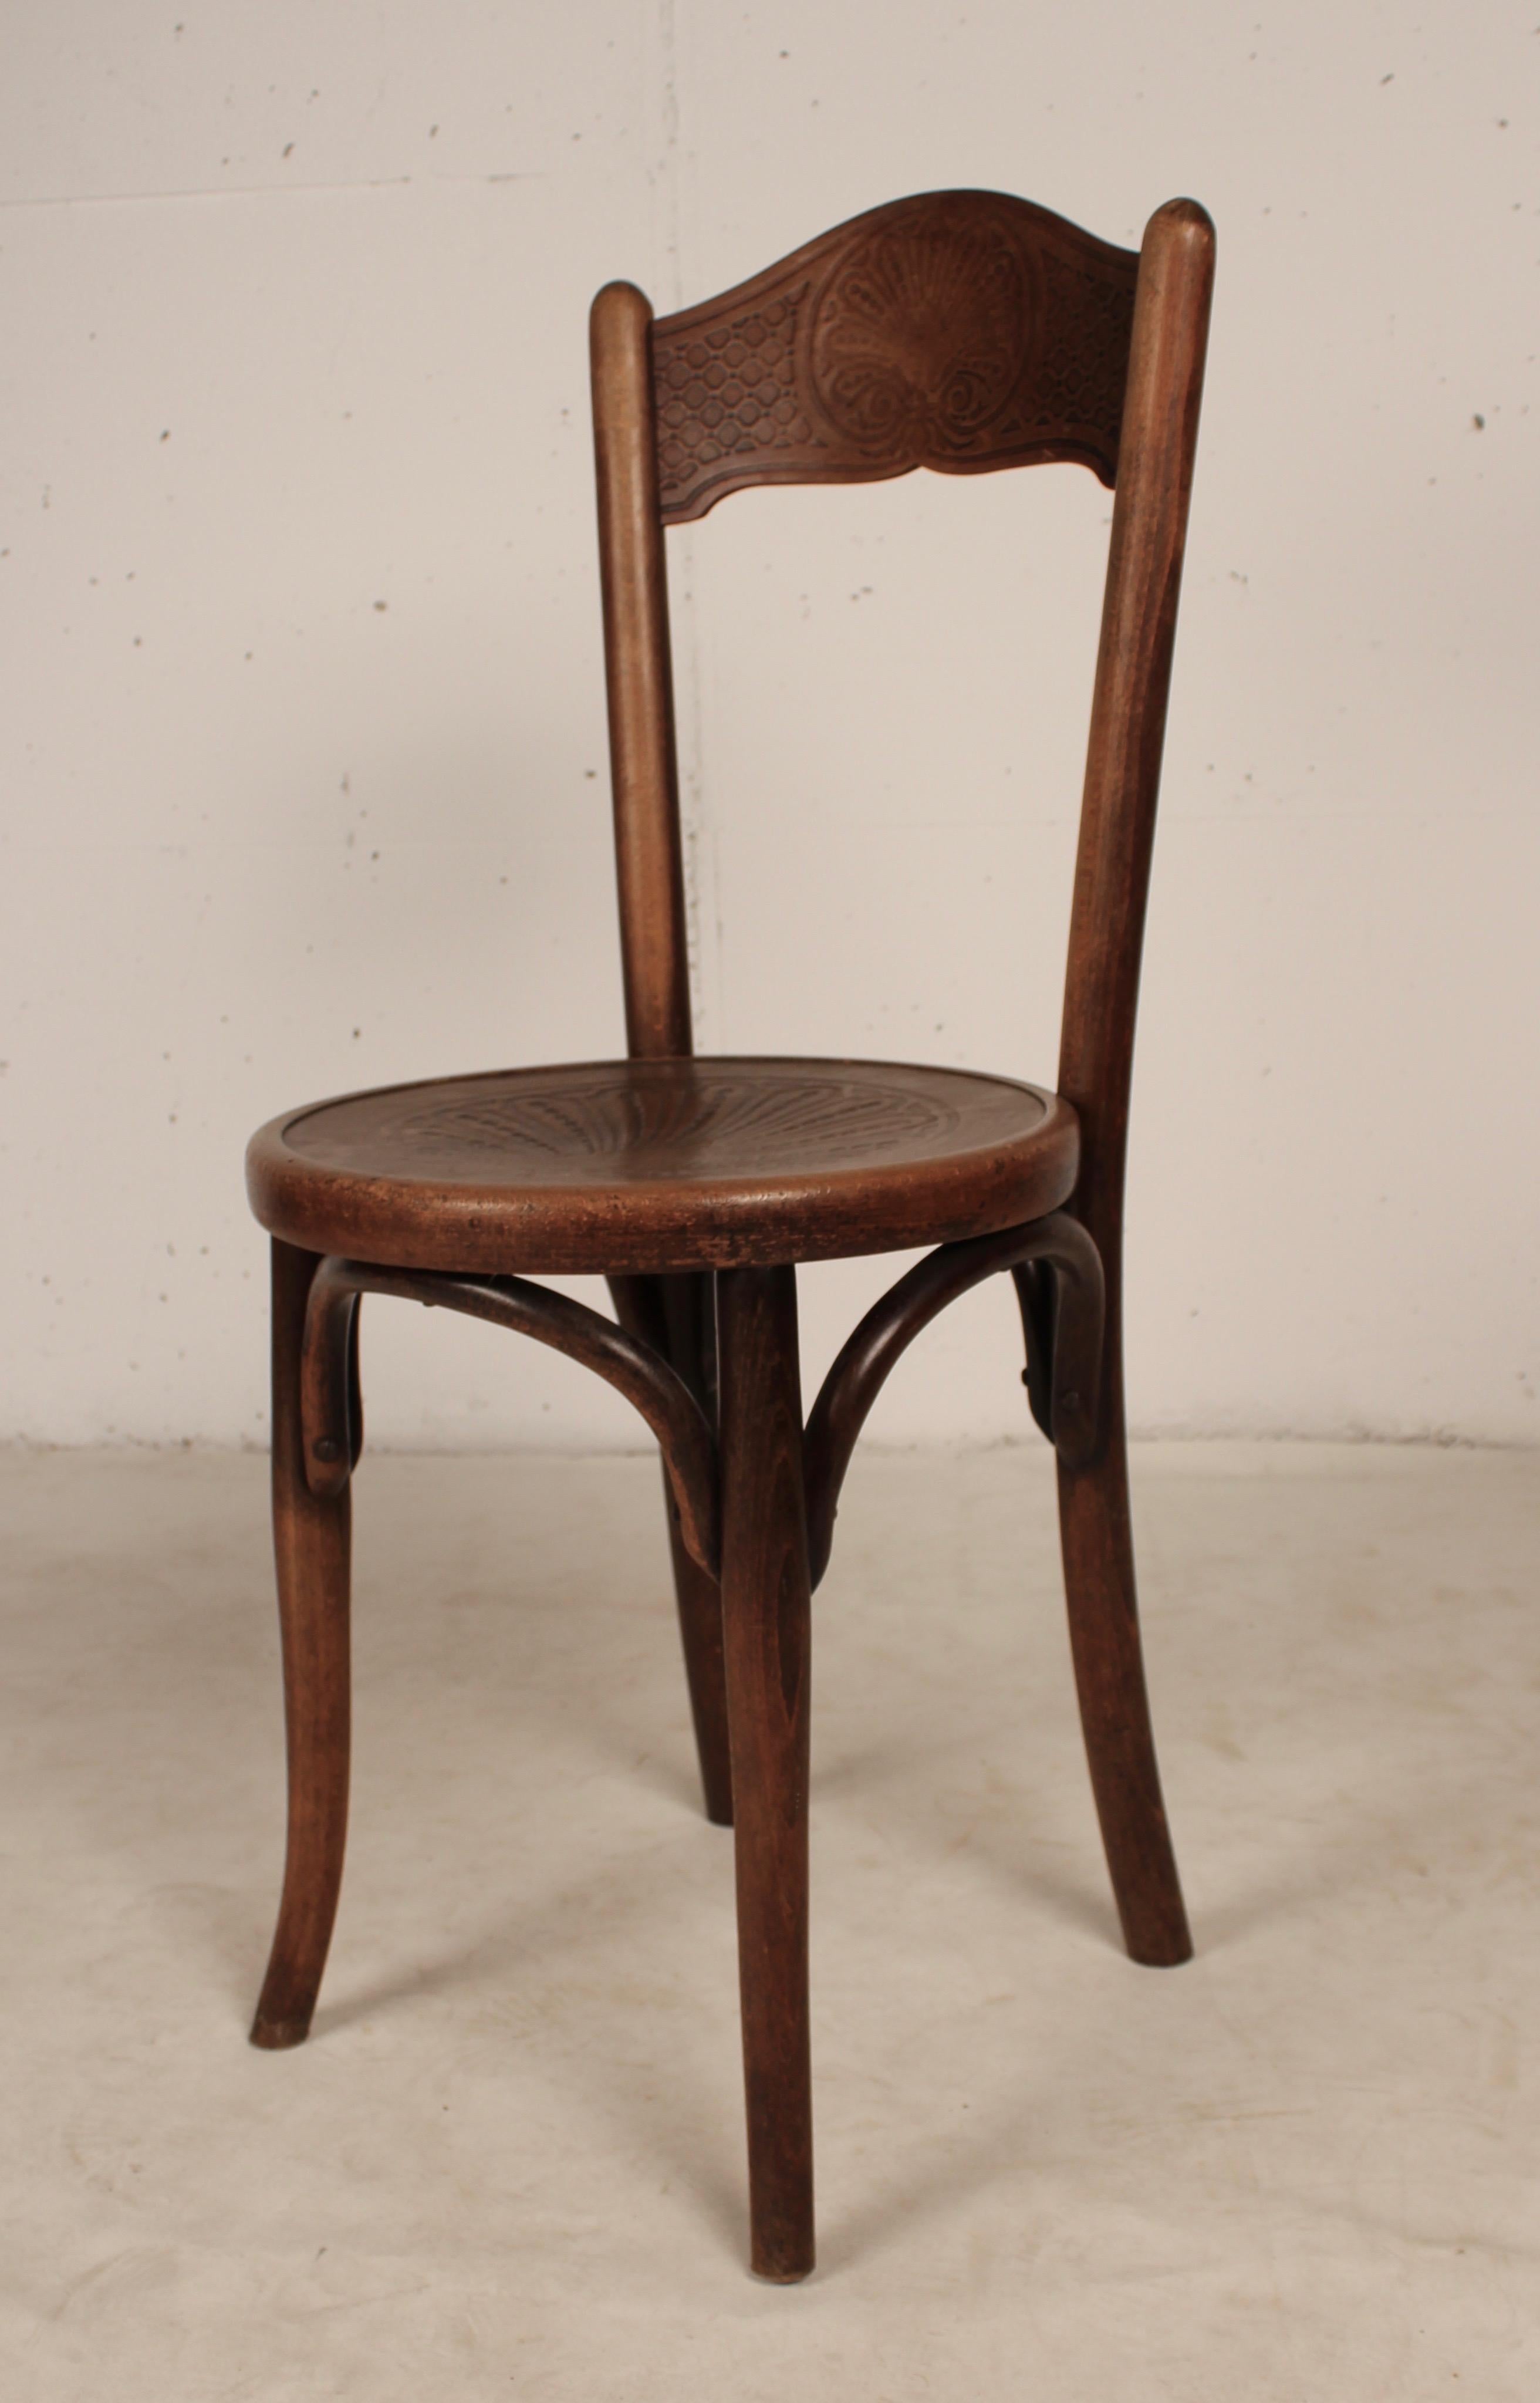 Set of 6 Bistro Chairs by Jacob & Josef Kohn, 1890 Austro-Hungarian Empire For Sale 6